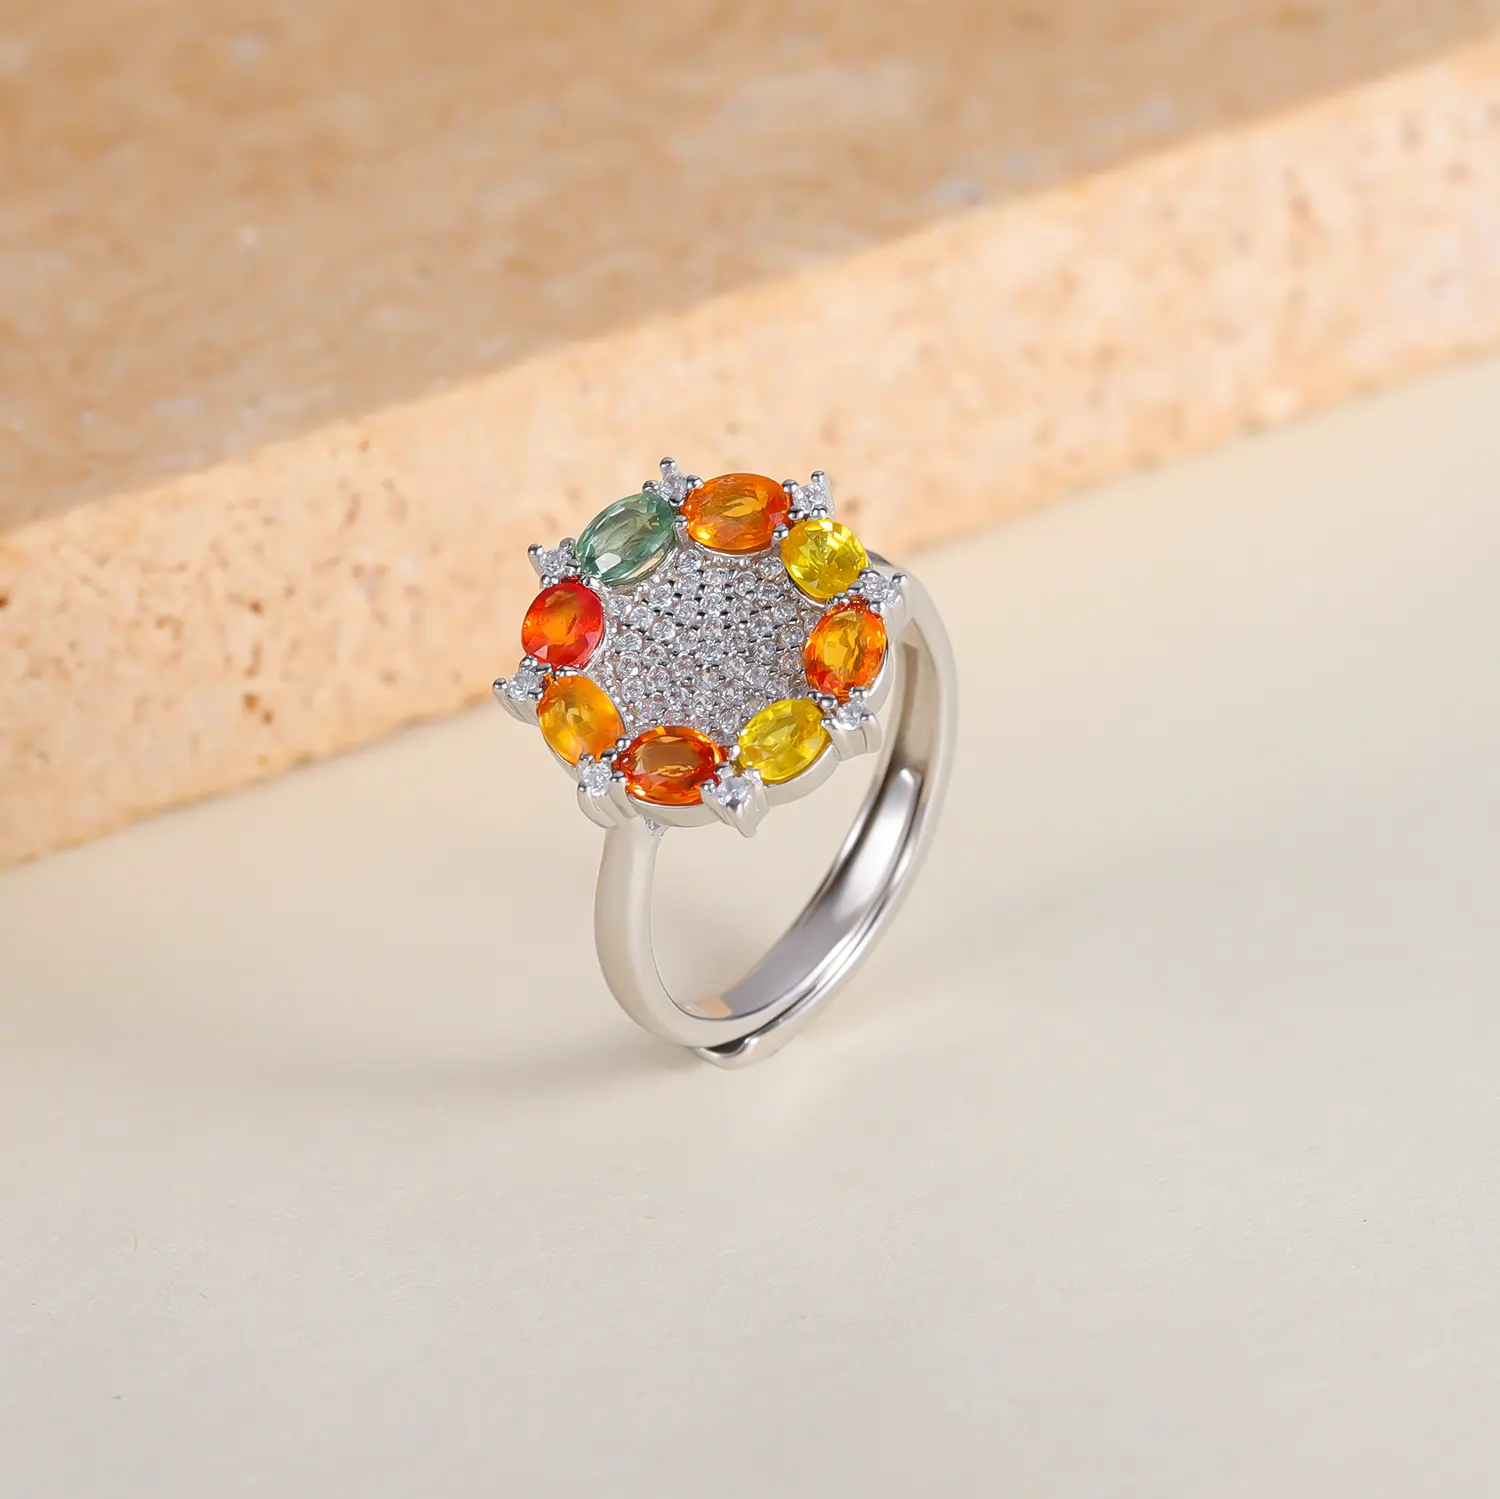 W0796 Abiding Jewelry Adjustable Ring Wholesale Natural Gemstone 925 Sterling Silver Multi Color Orange Sapphire Ring